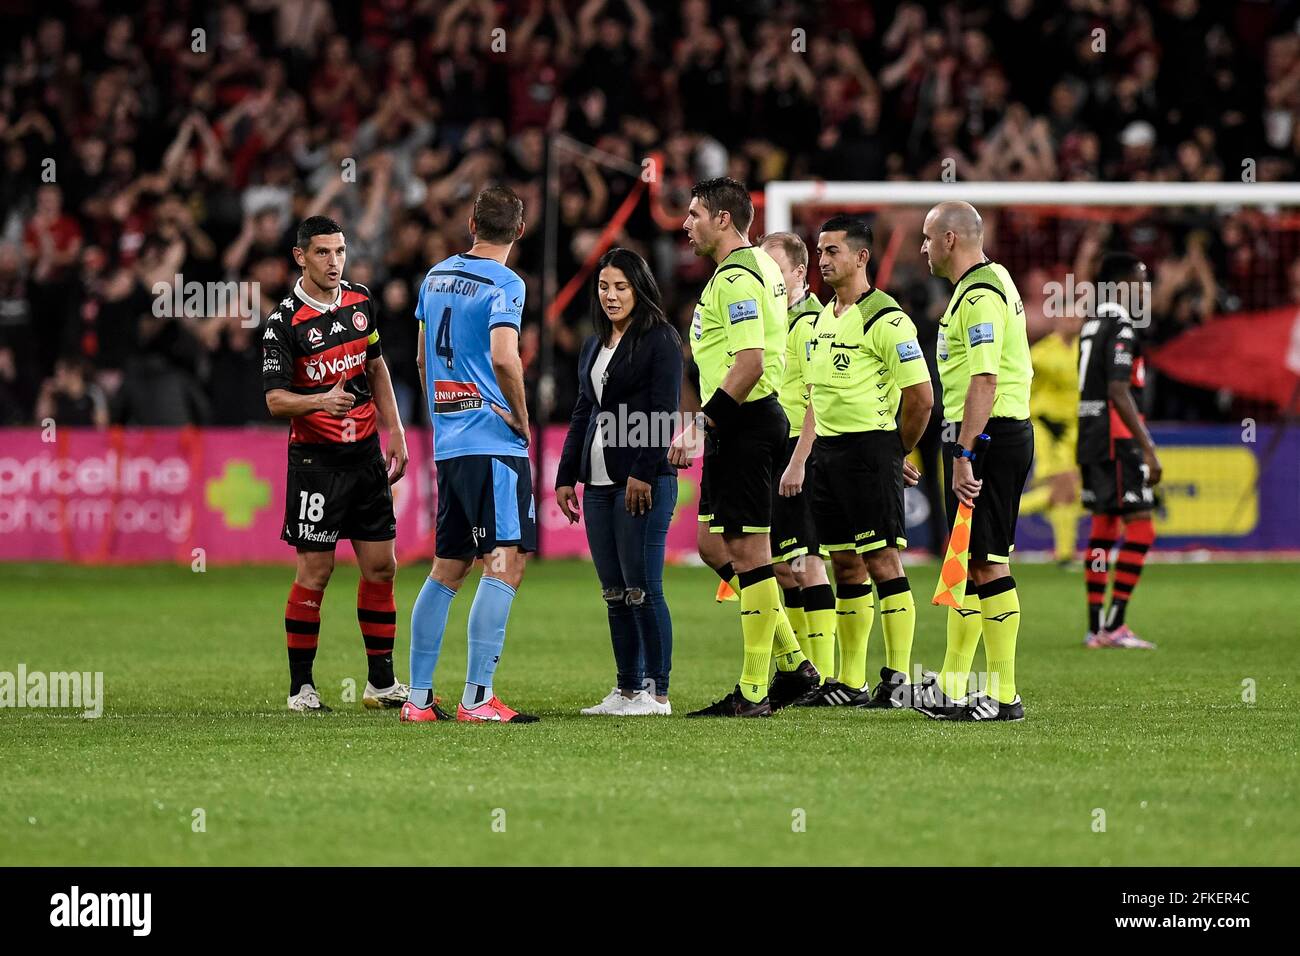 1st May 2021; Bankwest Stadium, Parramatta, New South Wales, Australia; A League Football, Western Sydney Wanderers versus Sydney FC; Graham Dorrans of Western Sydney Wanderers and Alex Wilkinson of Sydney during the coin toss Stock Photo